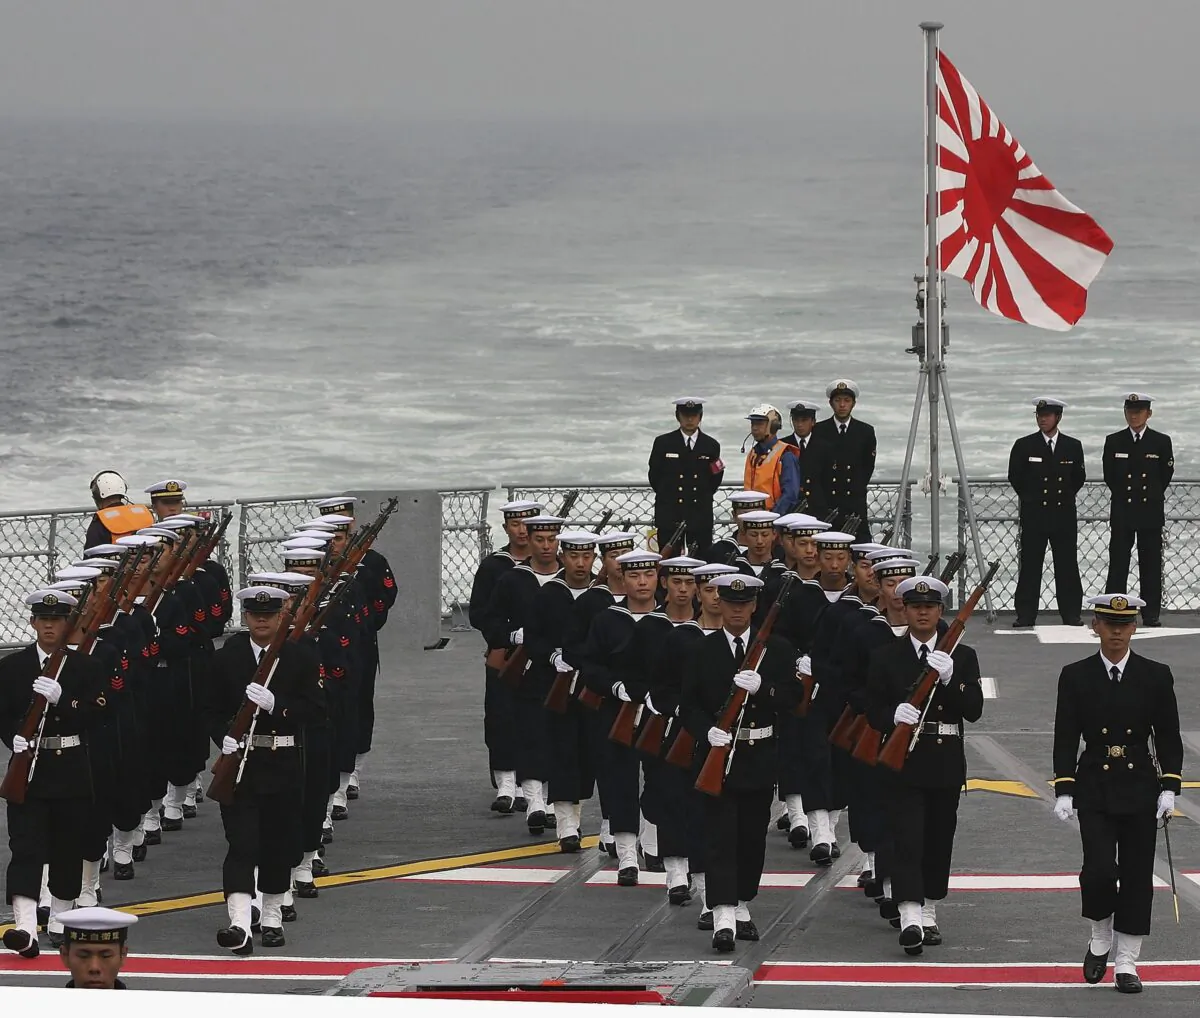 Members of the Japanese Maritime Defence Force march on board a ship during a naval fleet review on October 29, 2006 off Sagami Bay, Japan. (Koichi Kamoshida/Getty Images)